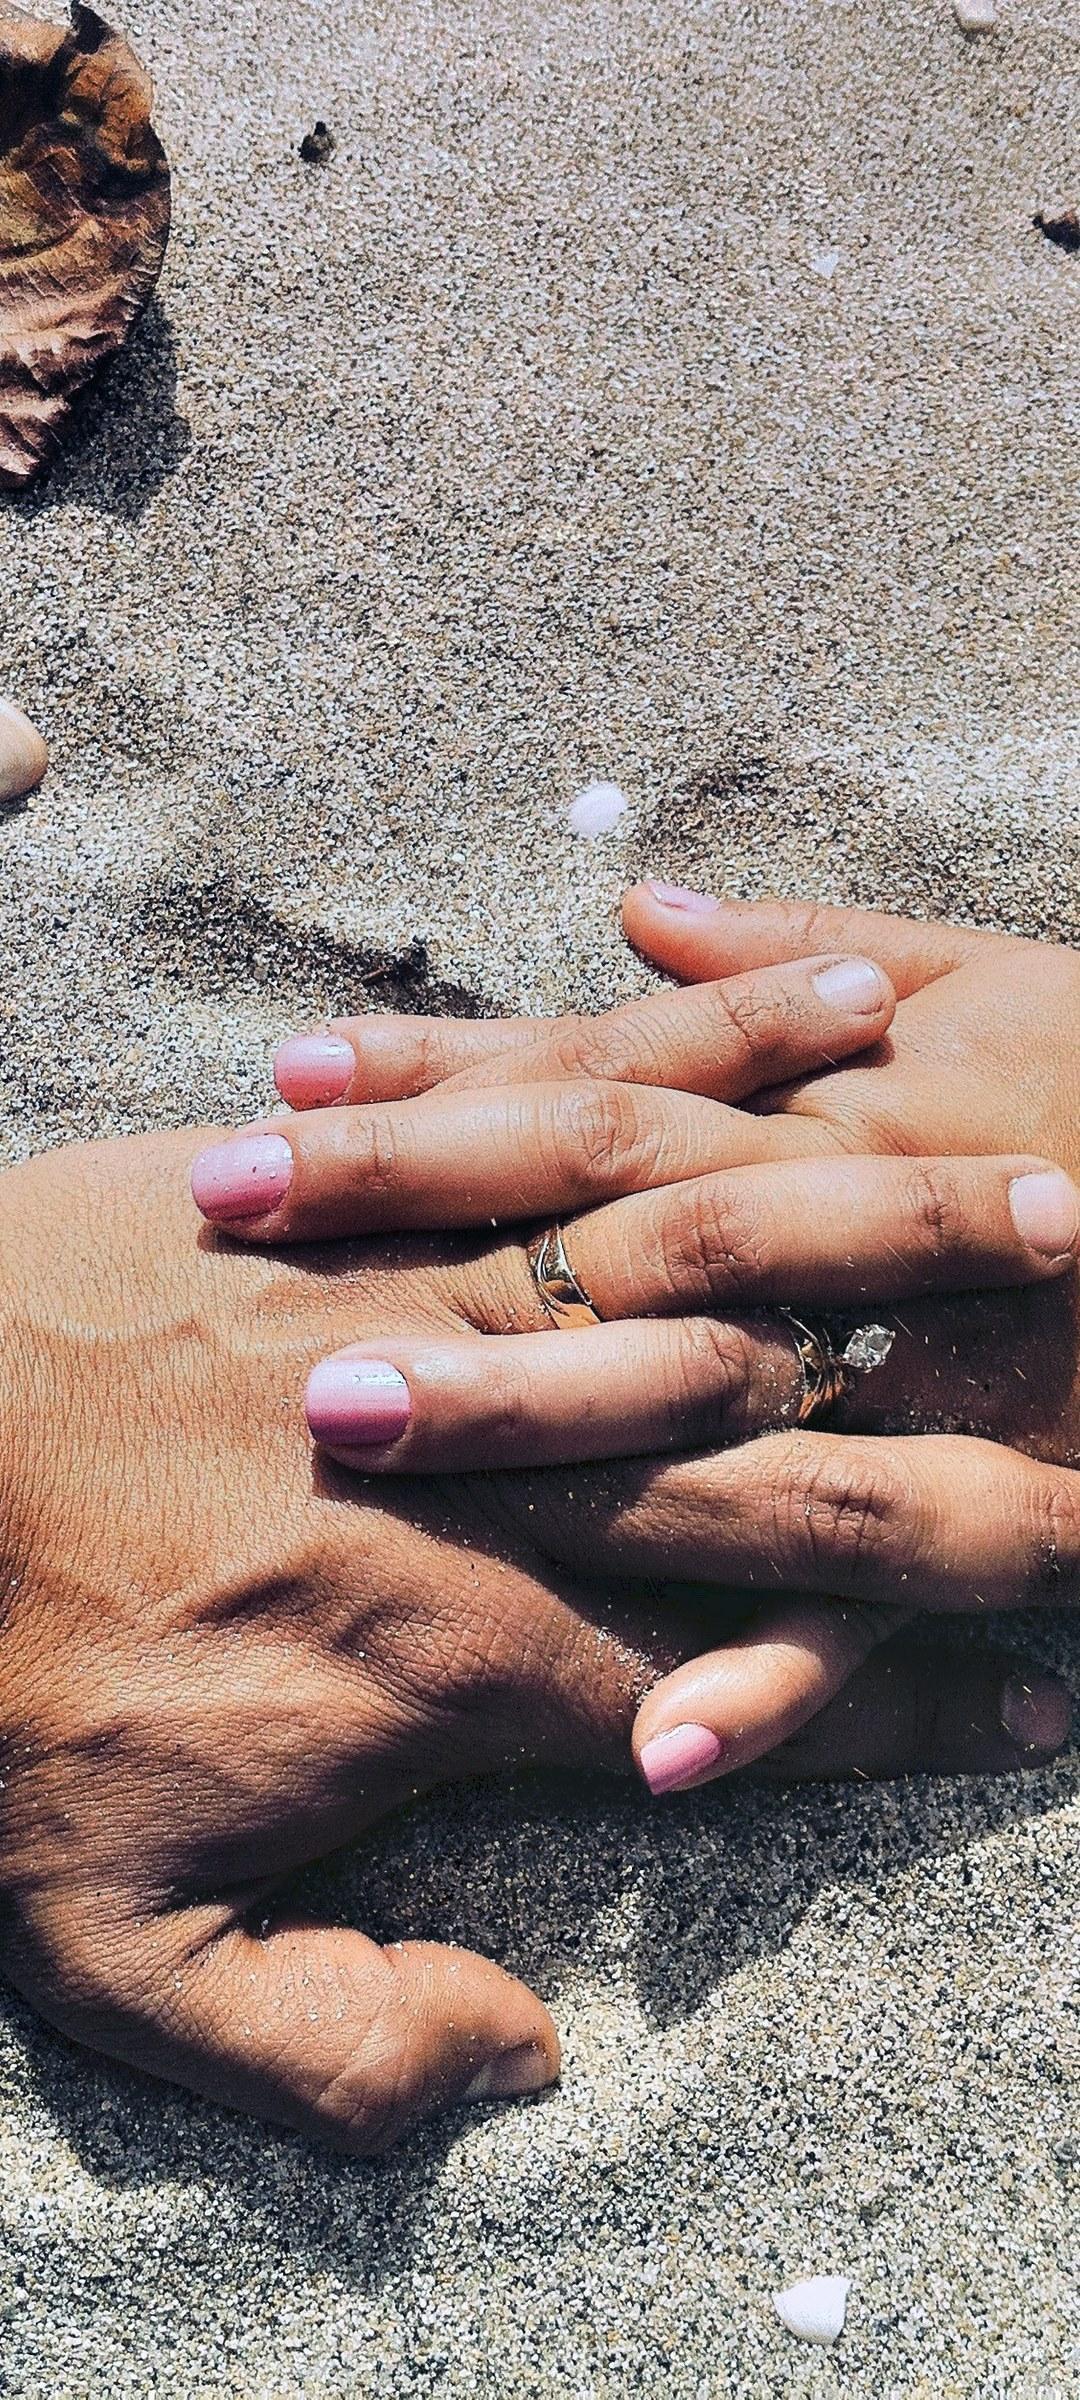 HD wallpaper, Huawei Y9A Wallpaper Hd, 1080X2400, A Married Couple At The Beach Wearing Wedding Rings Holds Hands On The Sand, Lovers Hands On Sand